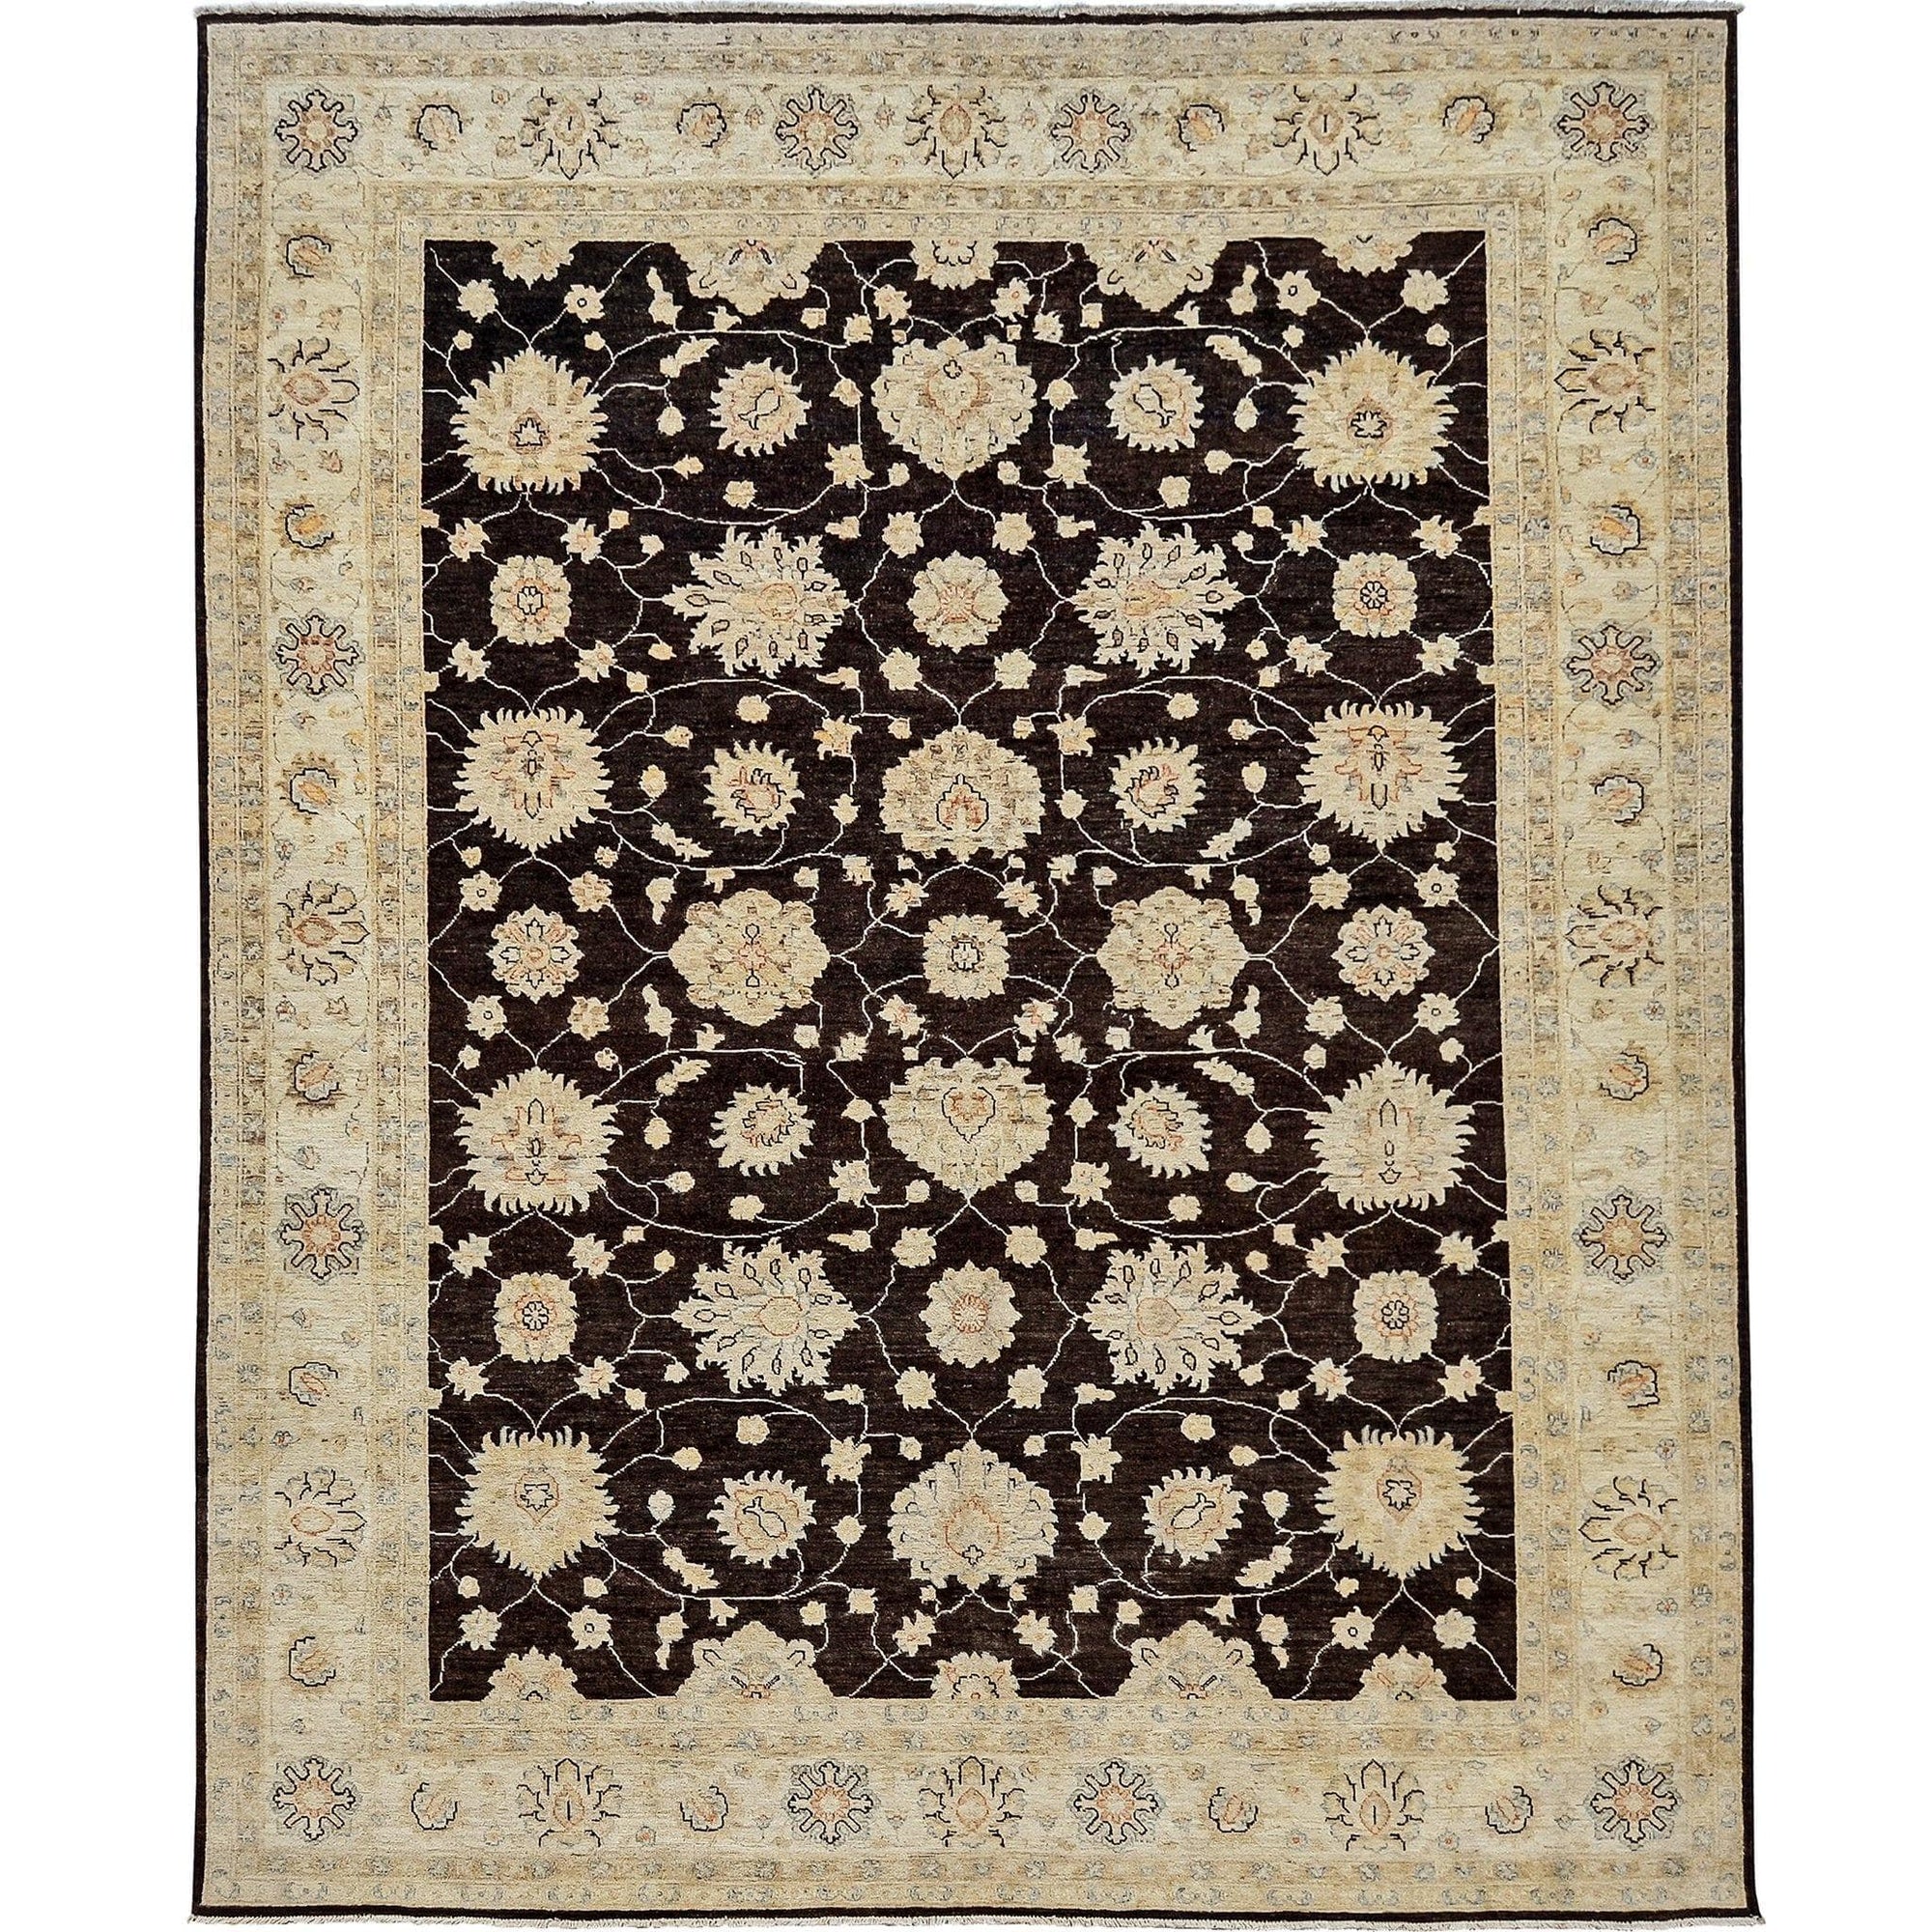 Fine Hand-knotted Transitional Wool Rug 244cm x 319cm